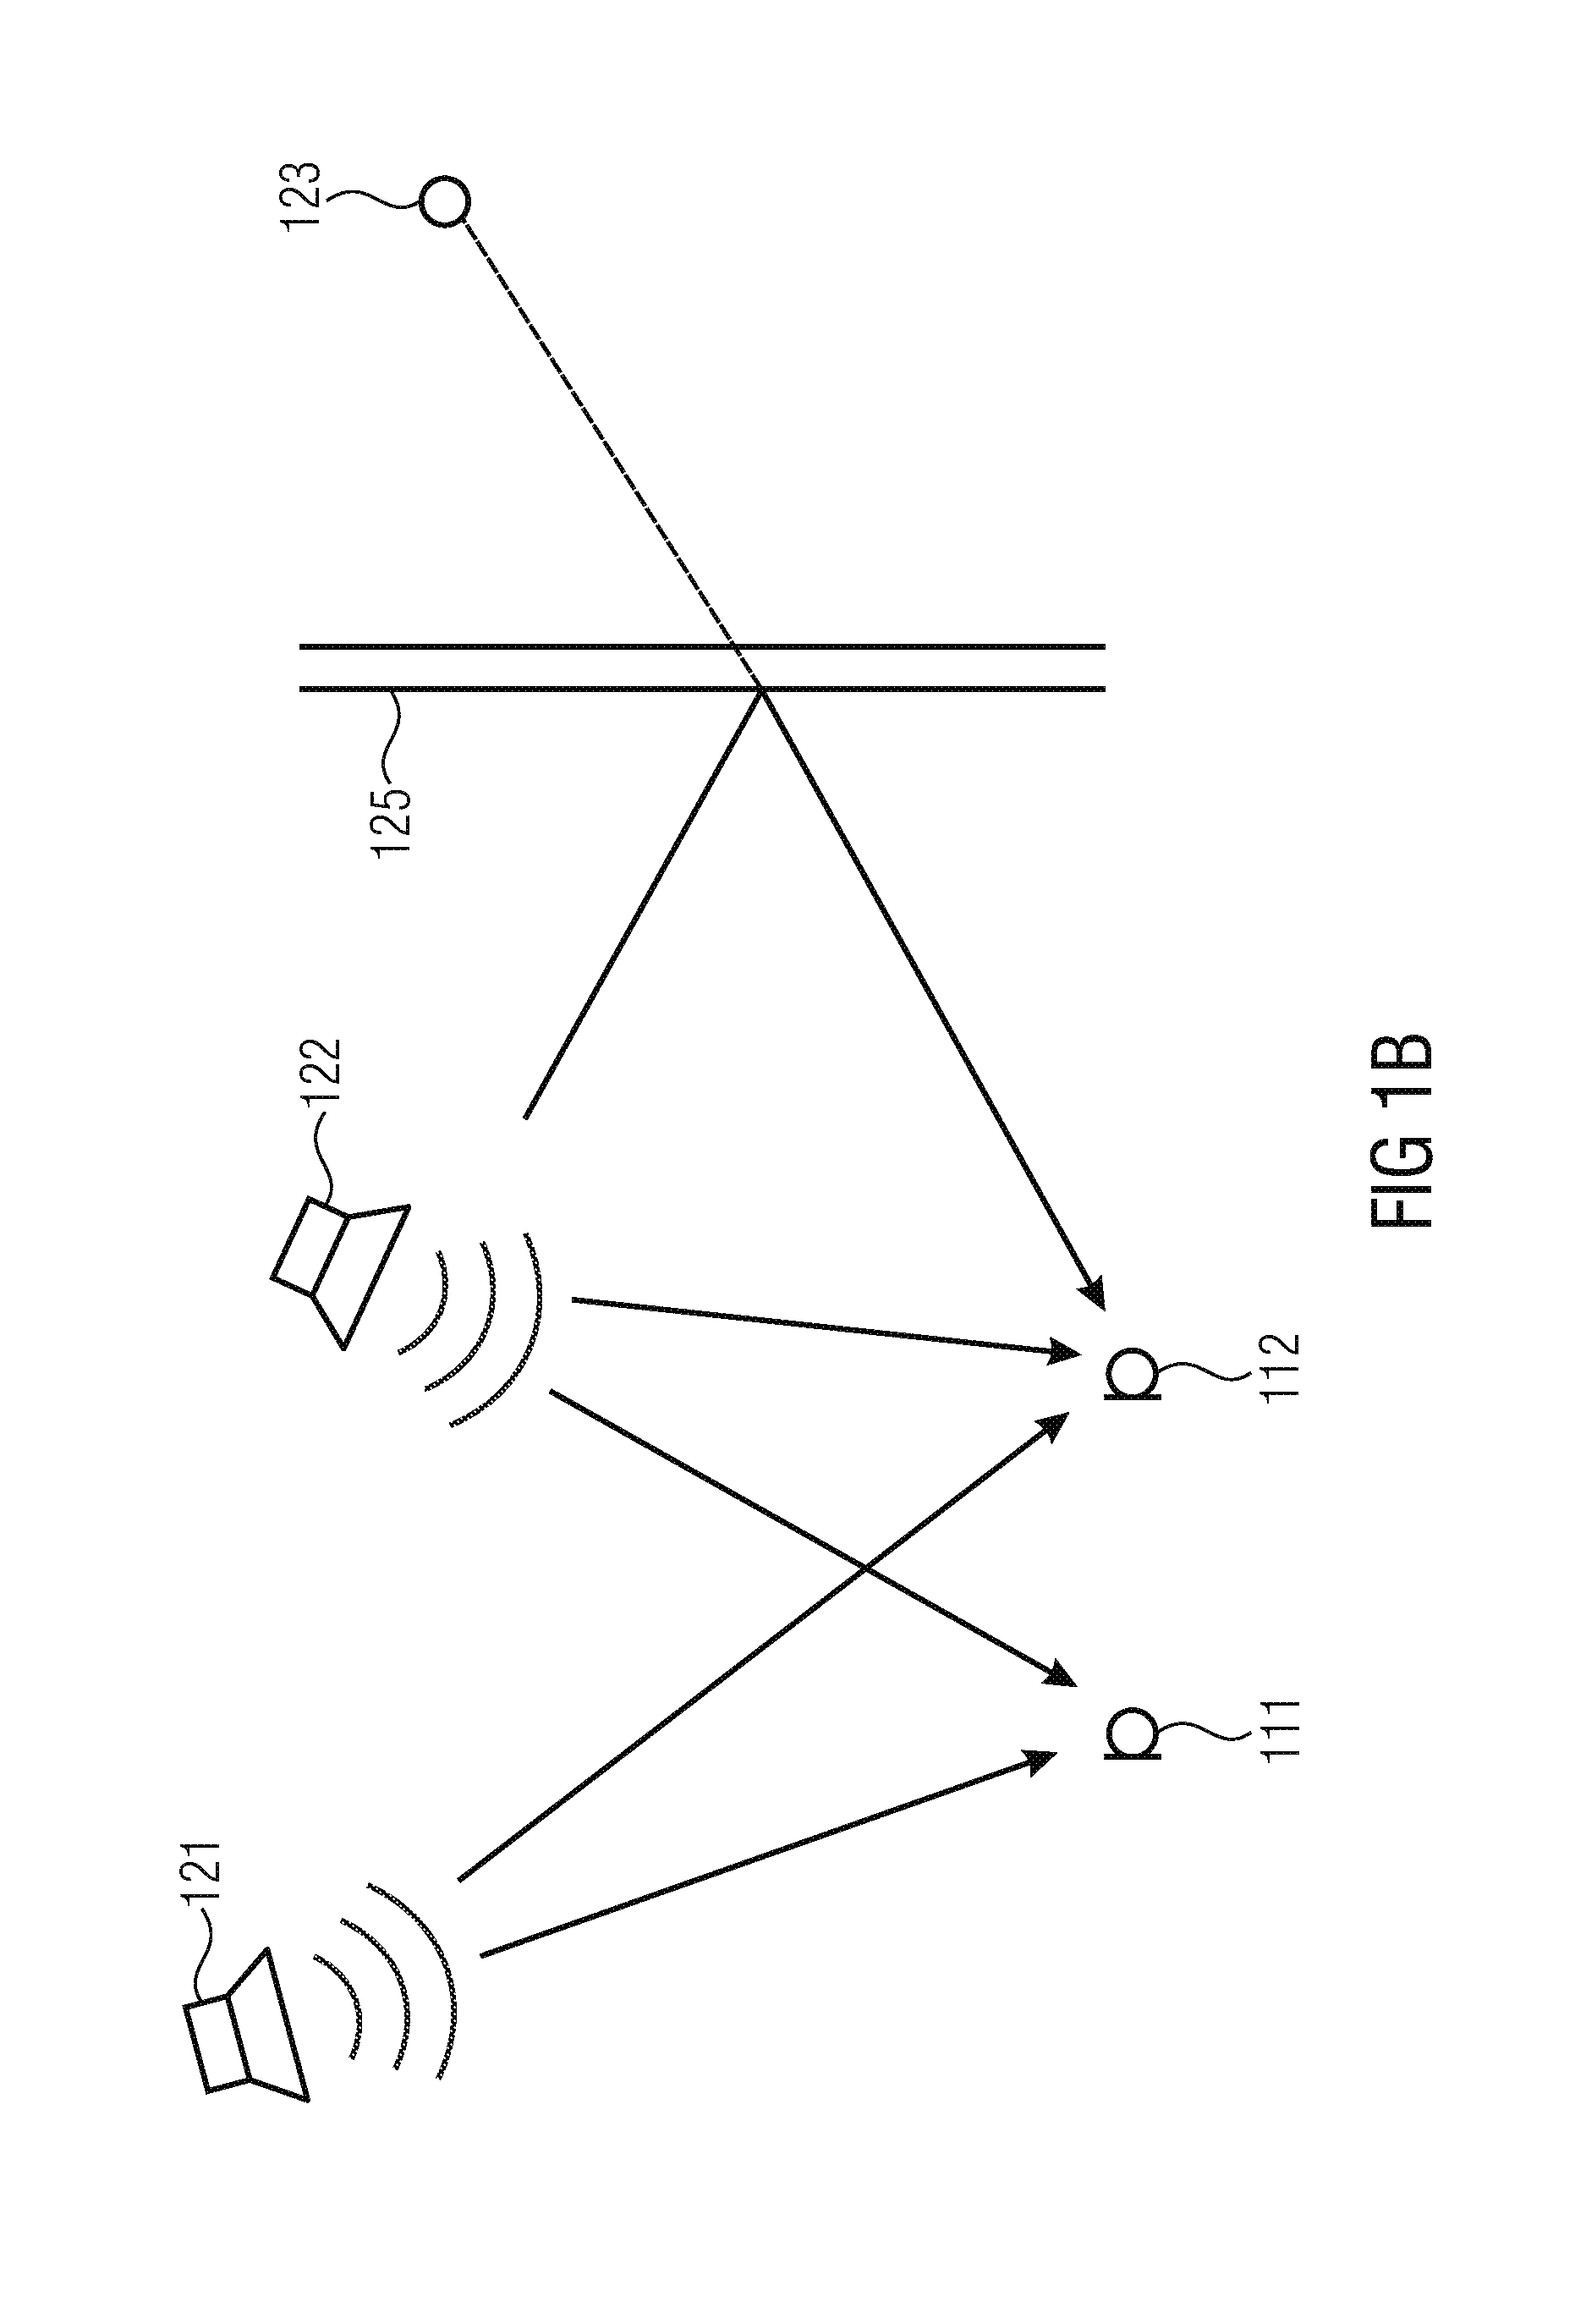 Filter and method for informed spatial filtering using multiple instantaneous direction-of-arrival estimates